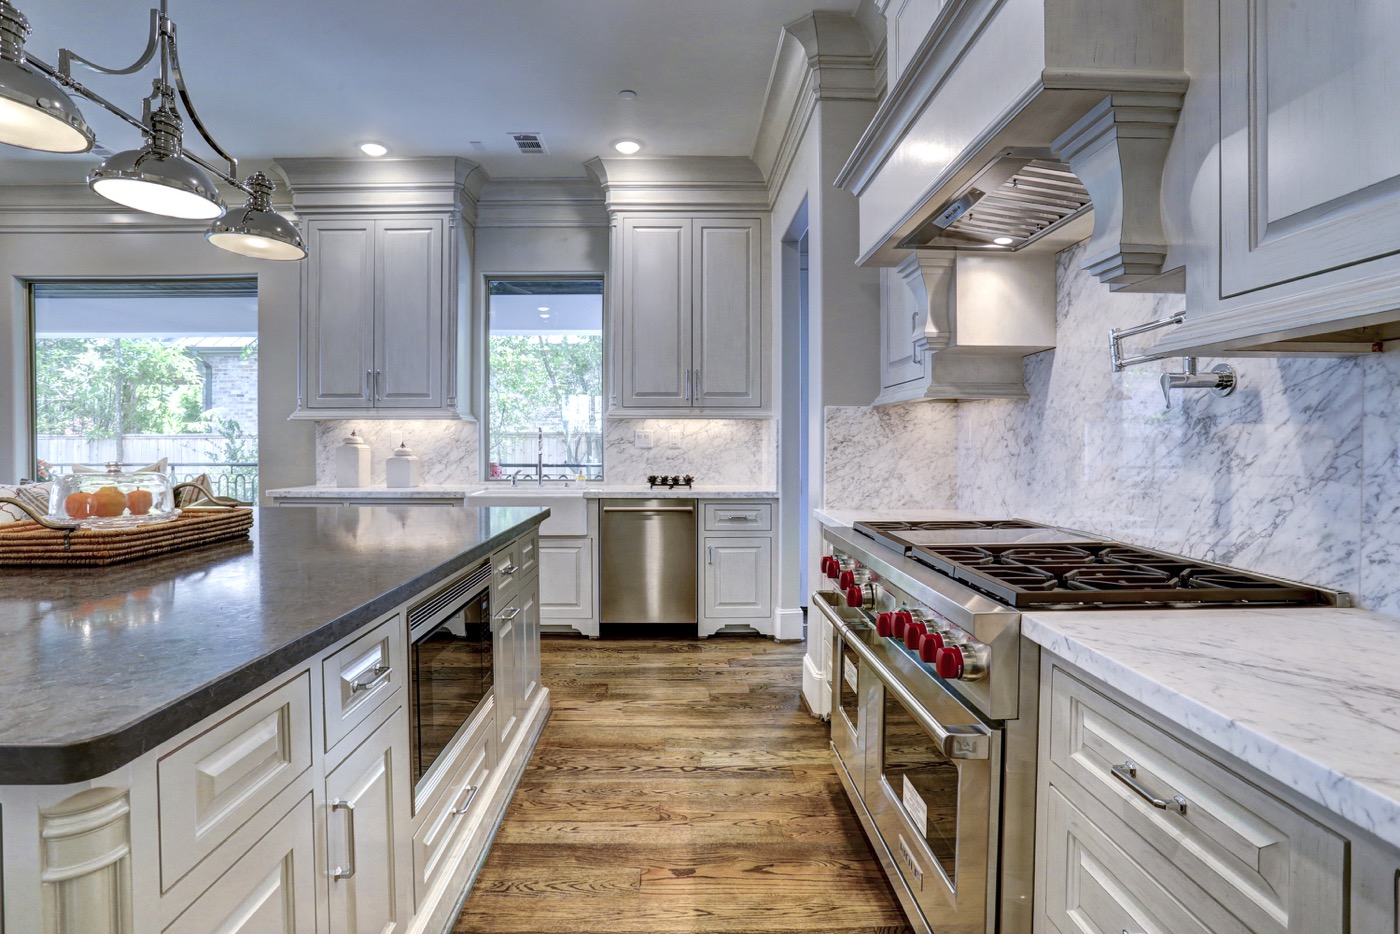 Kitchen boasts Sub-Zero and Wolfe Appliances as well as a pot filler, under-counter lighting, and farmhouse sink